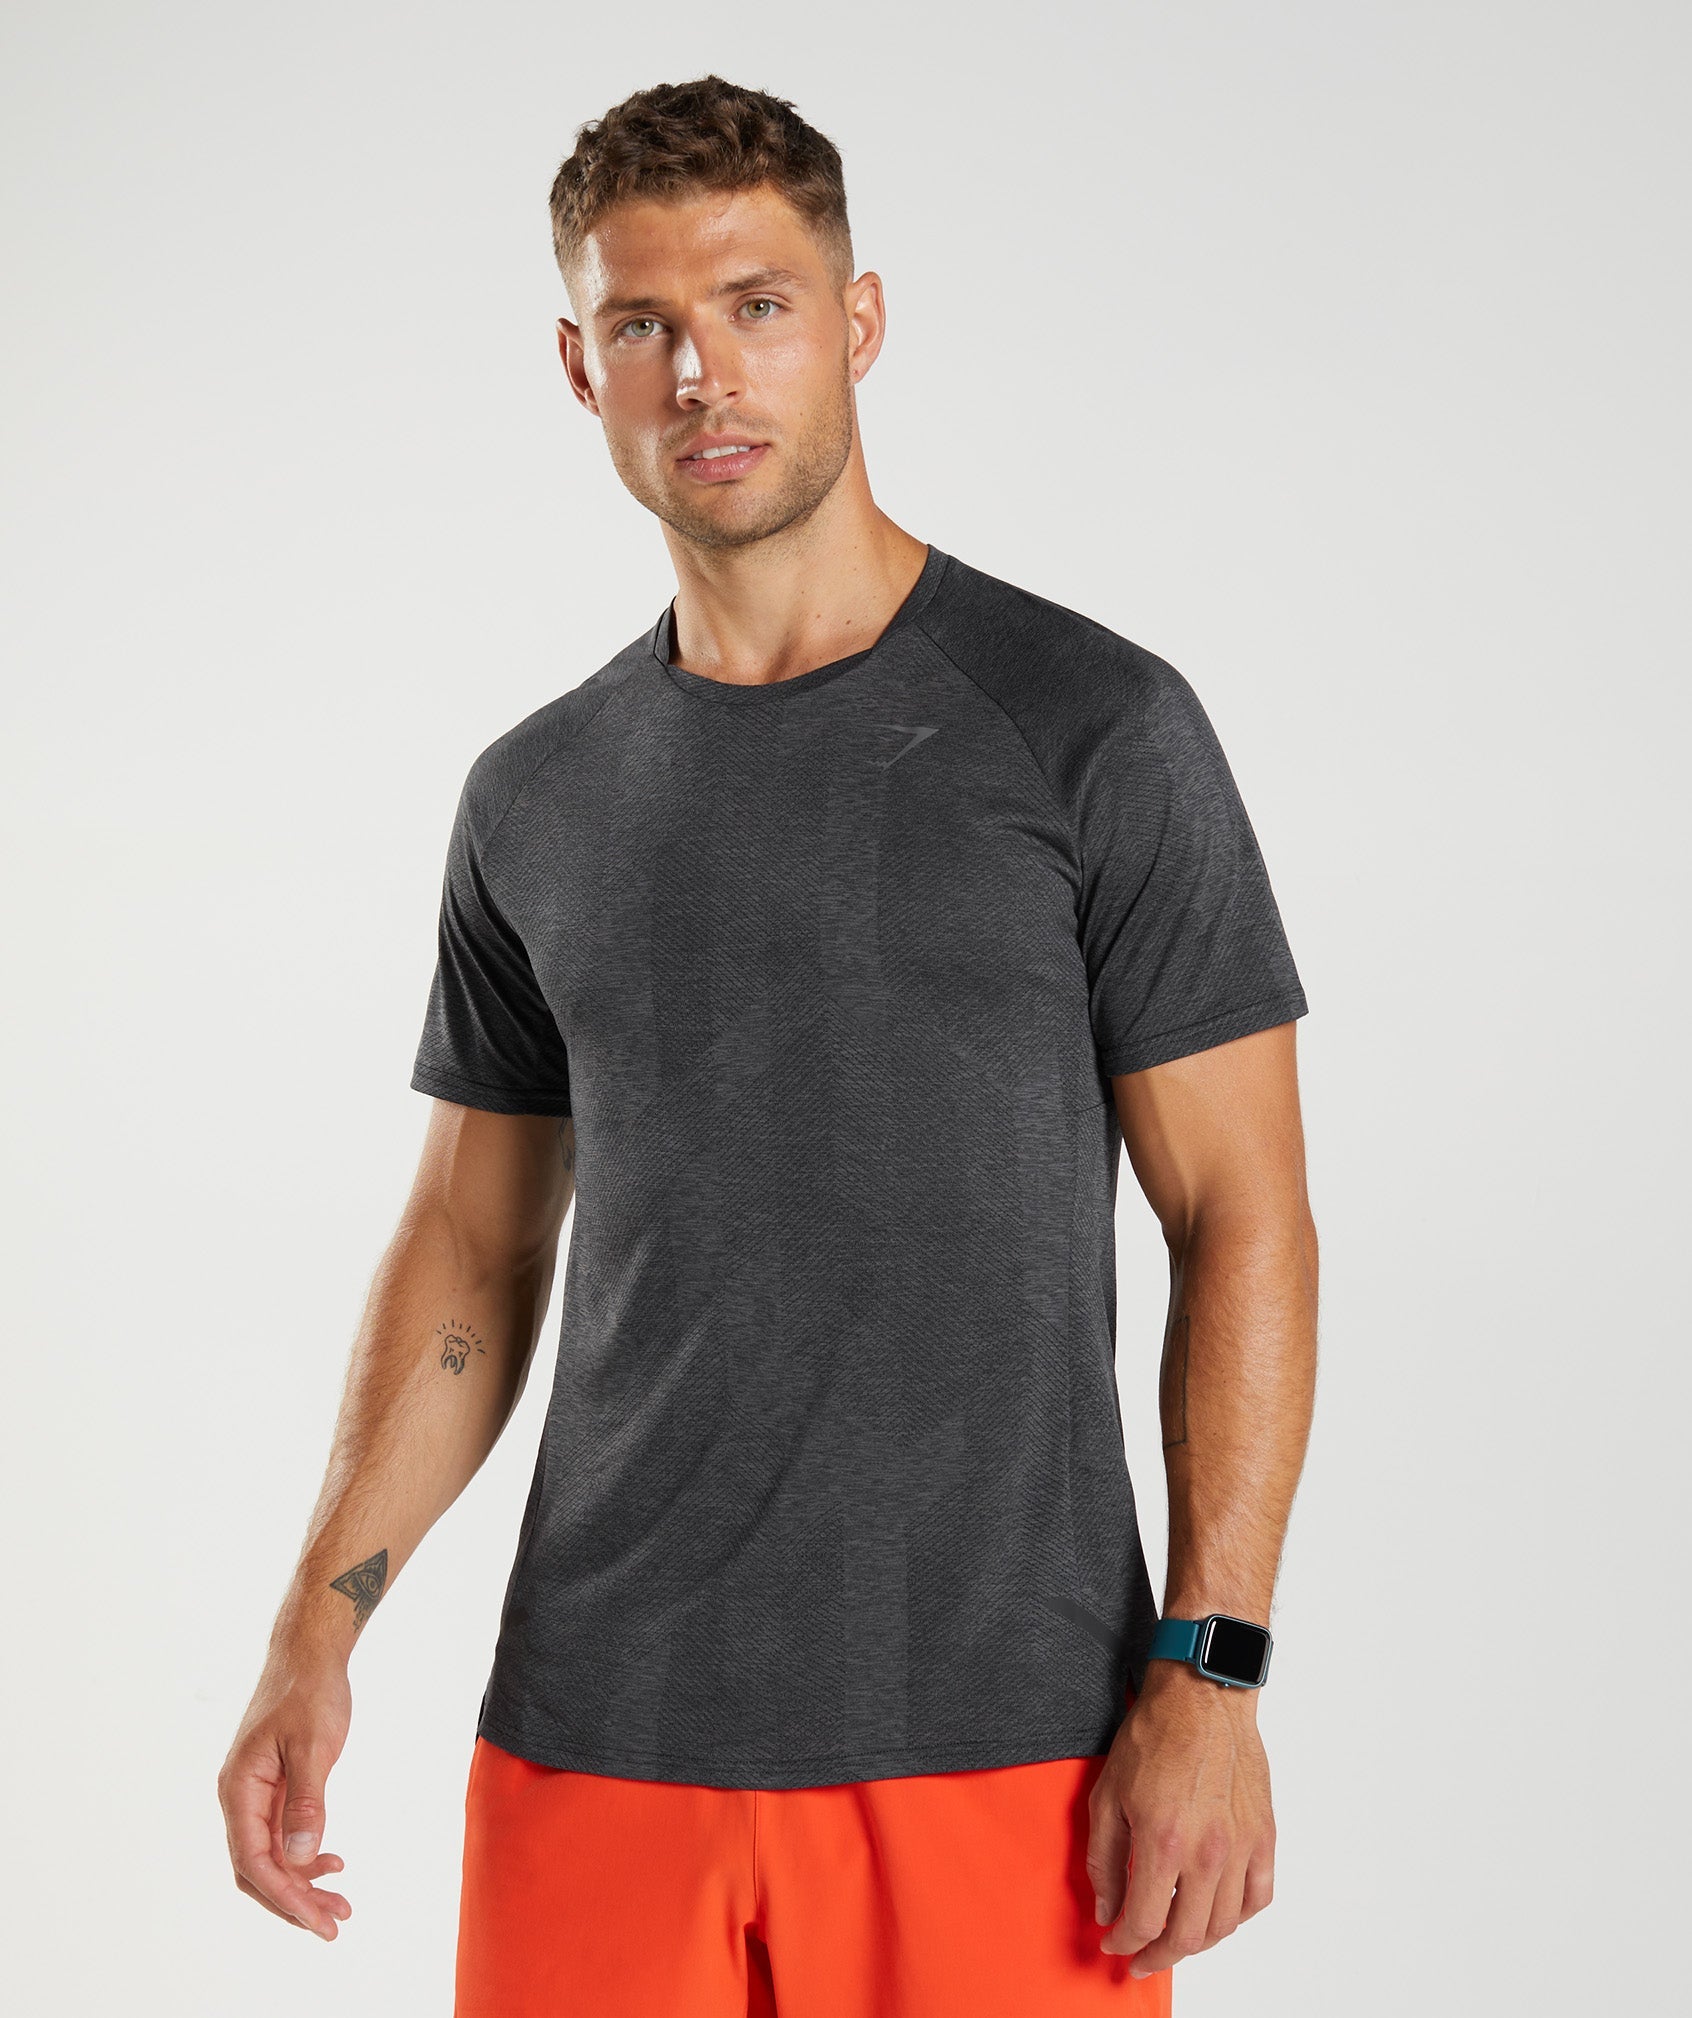 Apex T-Shirt in Black/Silhouette Grey - view 1